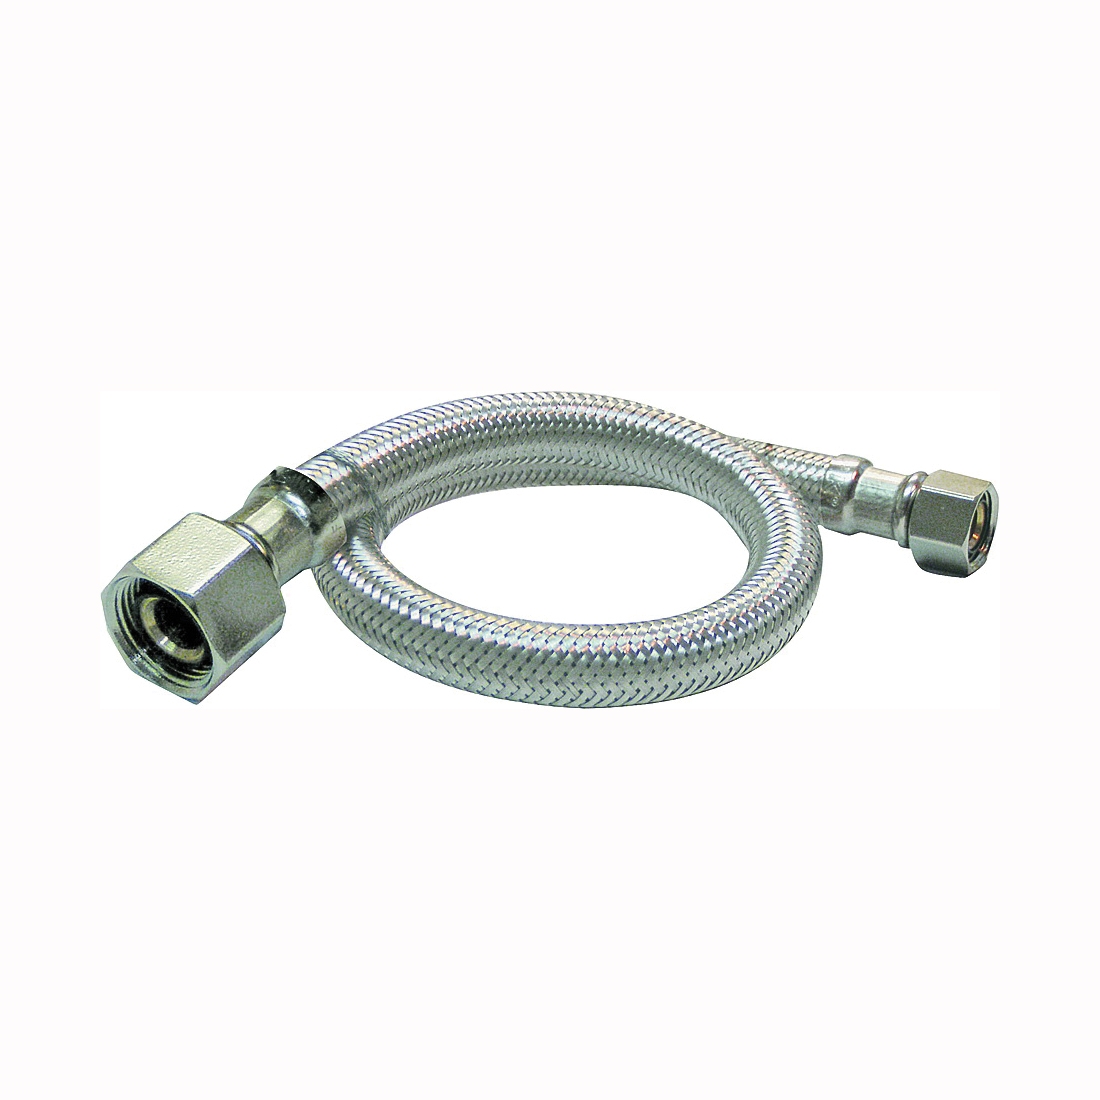 EZ Series PP23810LF Sink Supply Tube, 1/2 in Inlet, Compression Inlet, 1/2 in Outlet, FIP Outlet, Stainless Steel Tubing, 12 in L